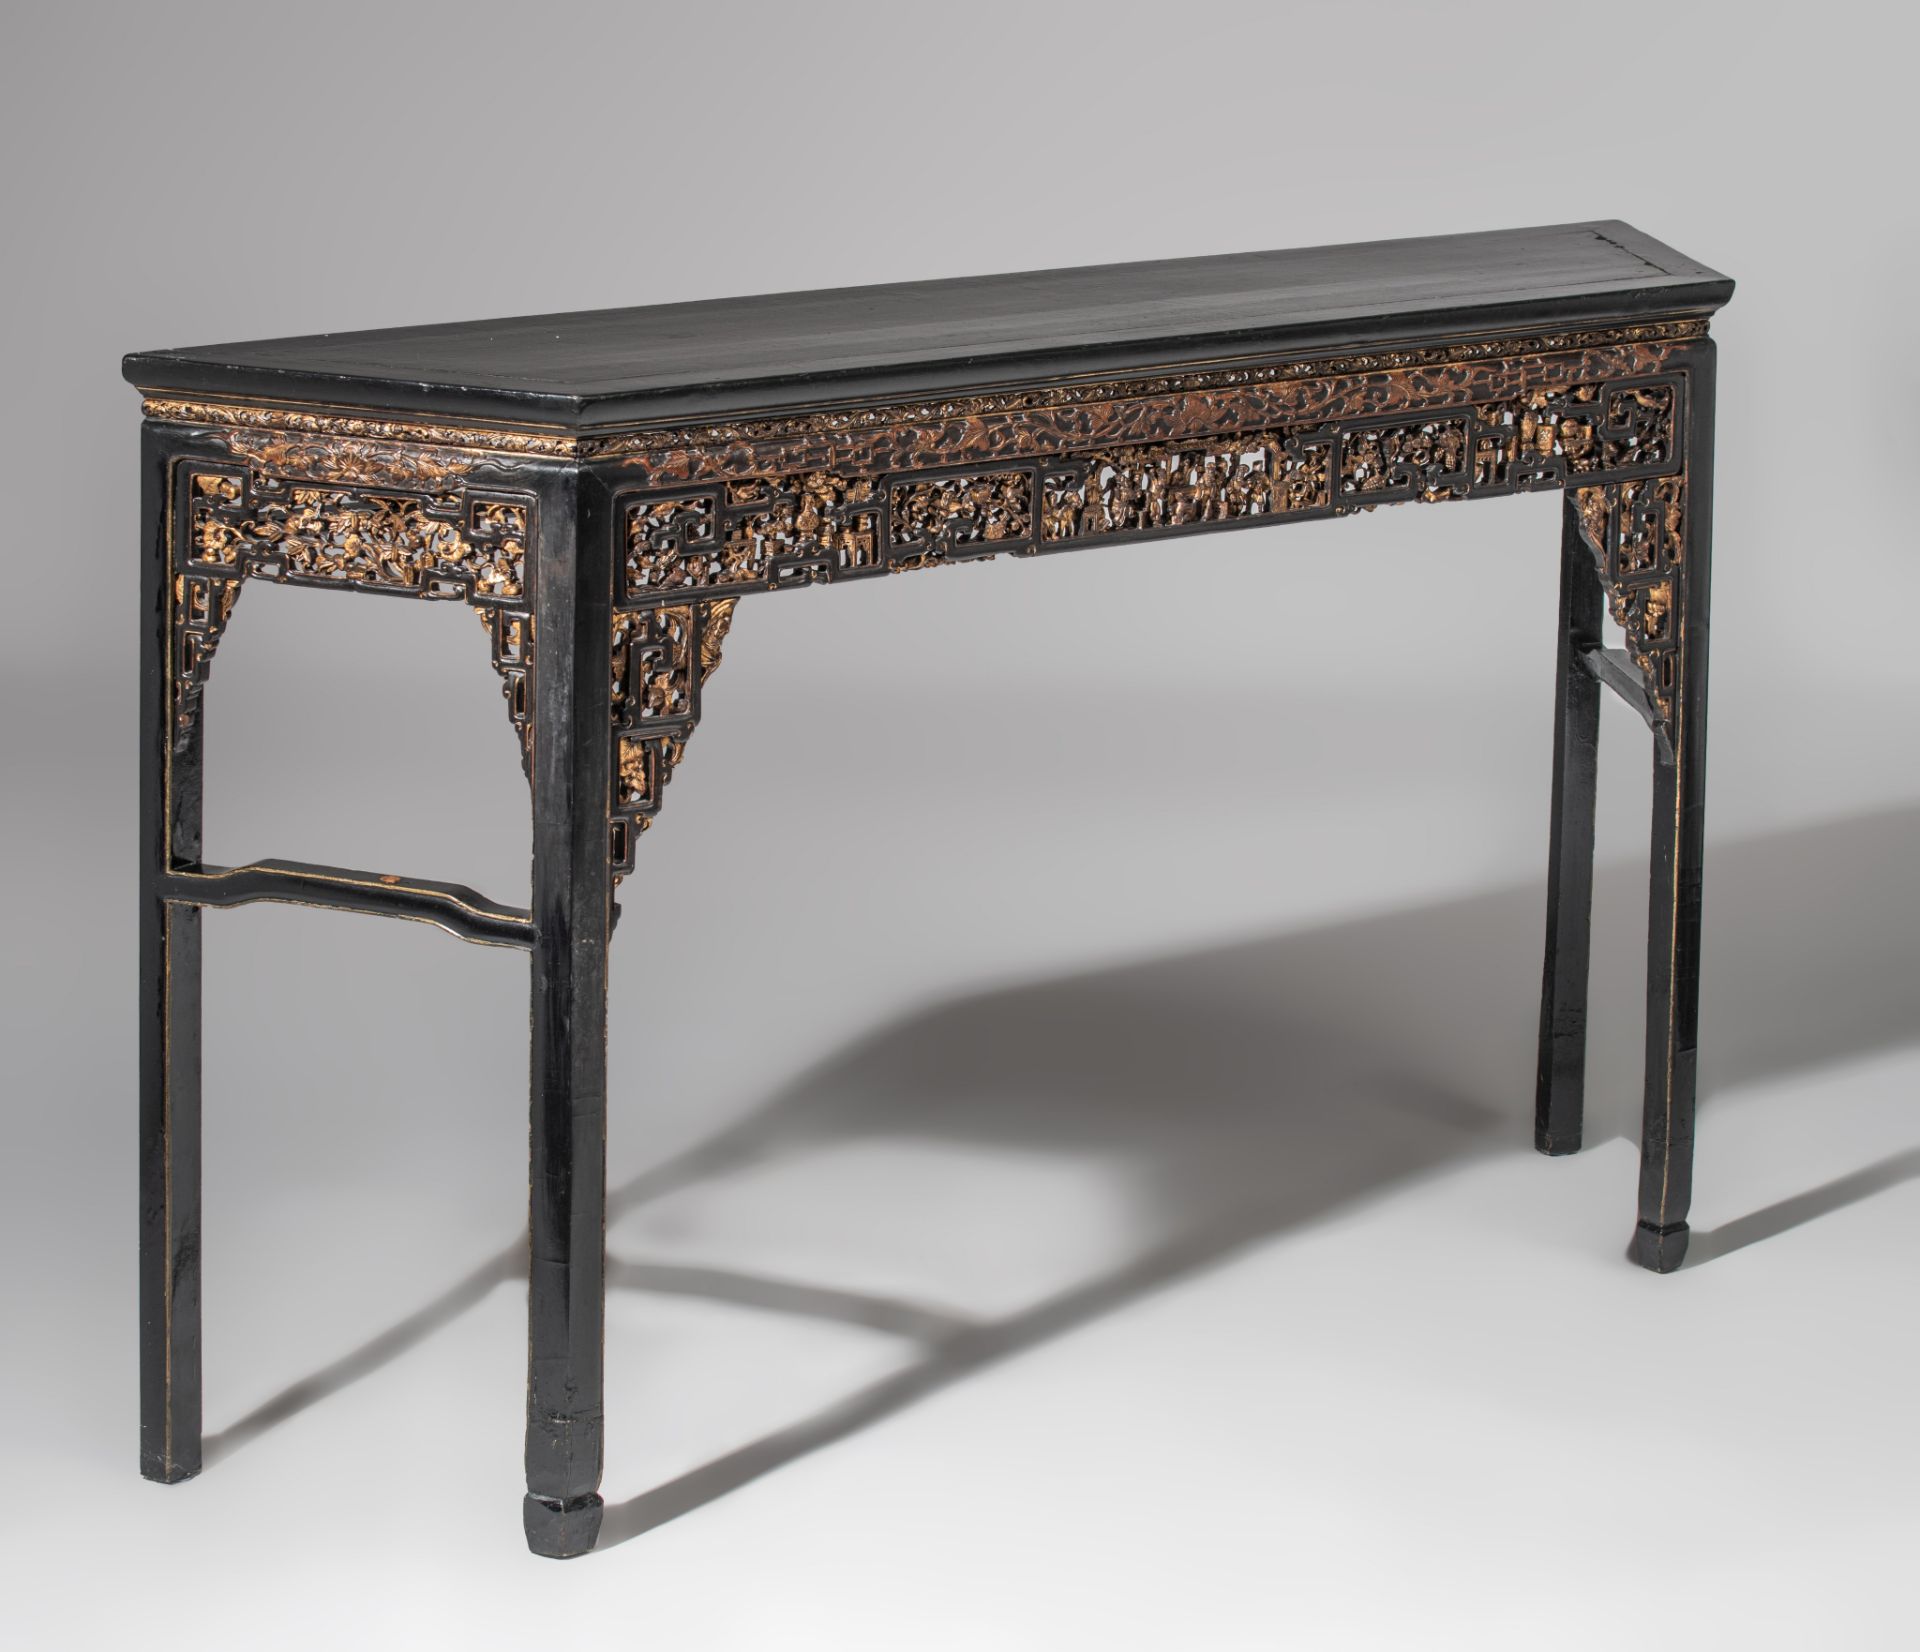 A Chinese gilt and lacquered carved side table, late Qing/Republic period, H 107 - L 187 - D 40 cm - Image 2 of 10